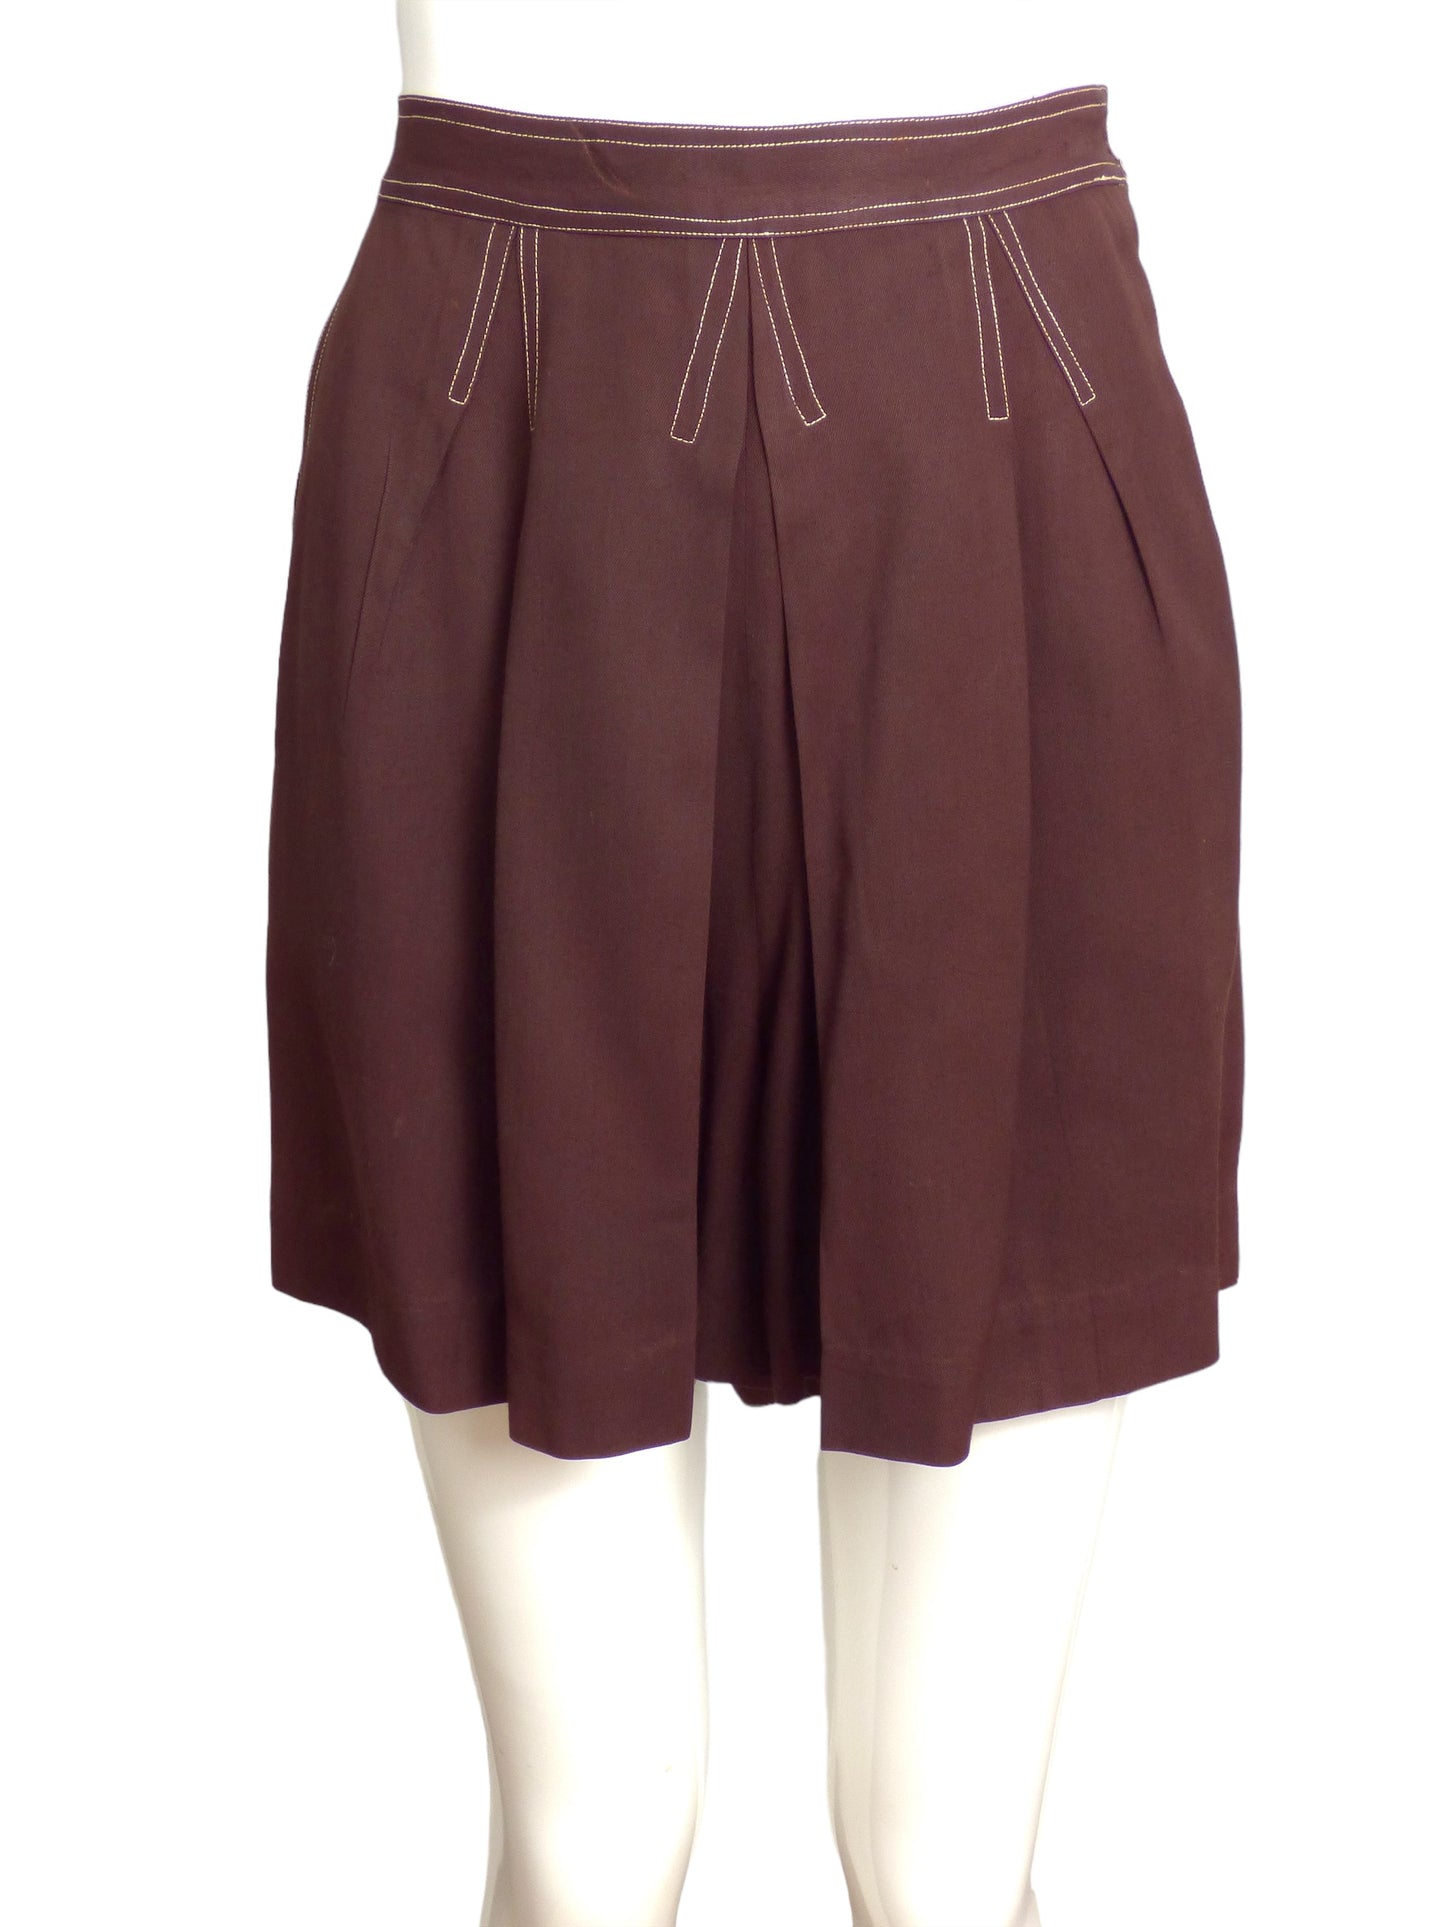 CLAIRE MCCARDELL- AS IS 1940s 3pc Brown Gaberdine Playsuit, Size 6